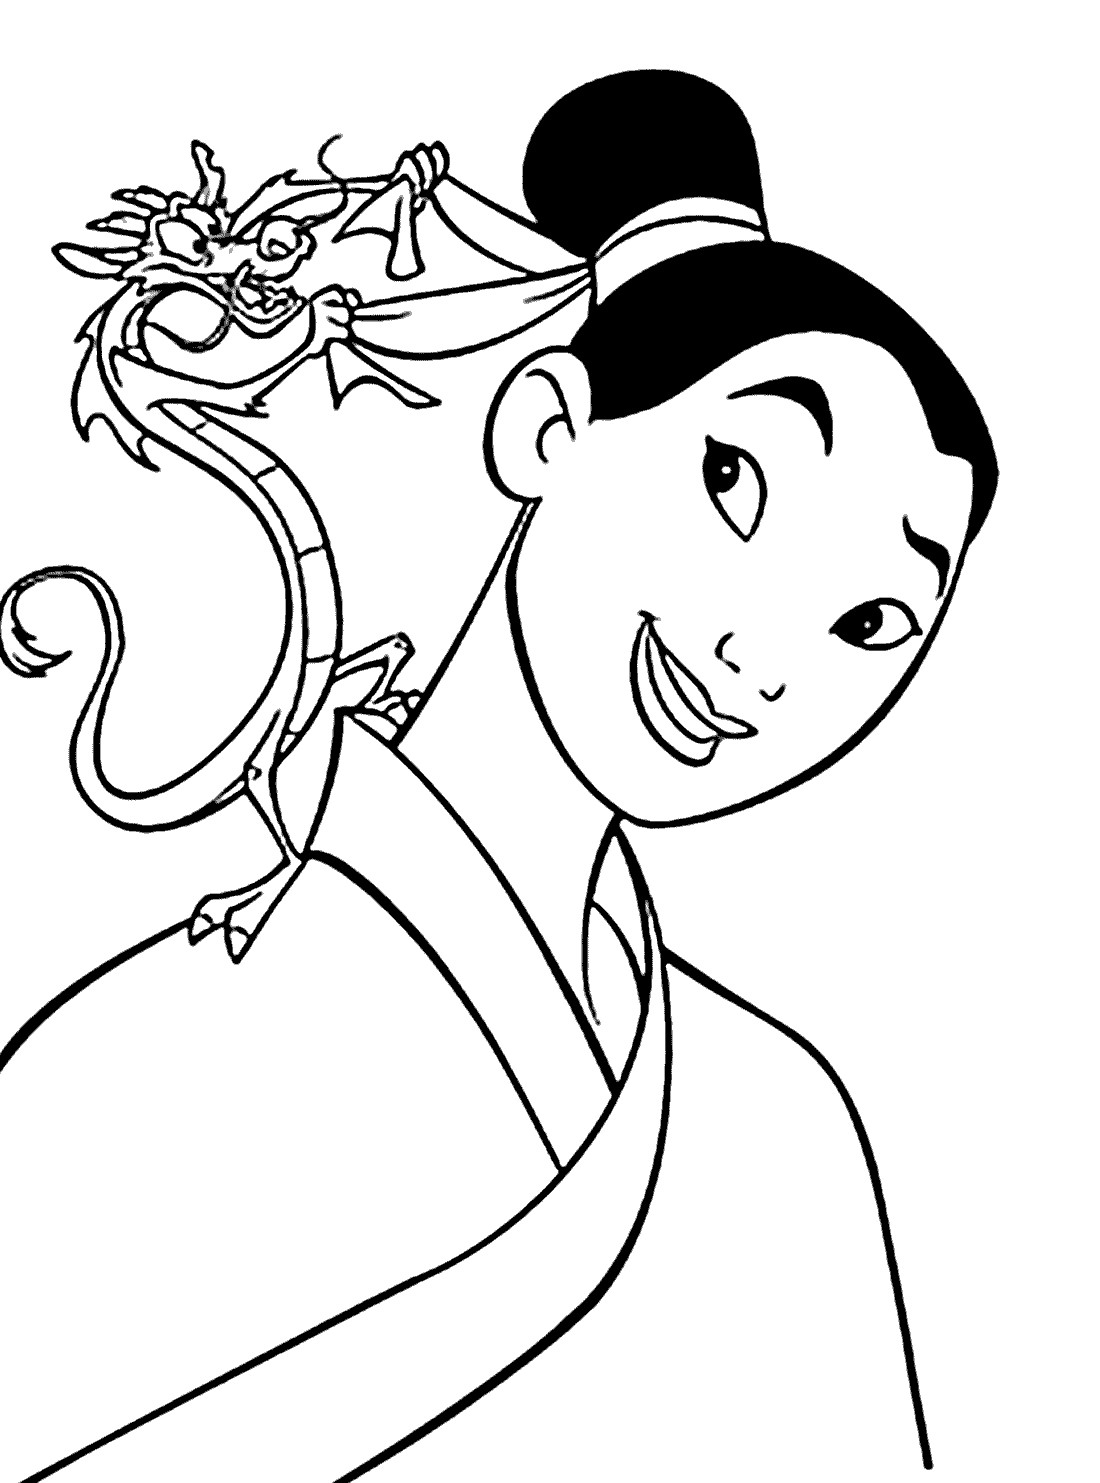 Coloring Sheet Free Printable
 Mulan coloring pages to and print for free